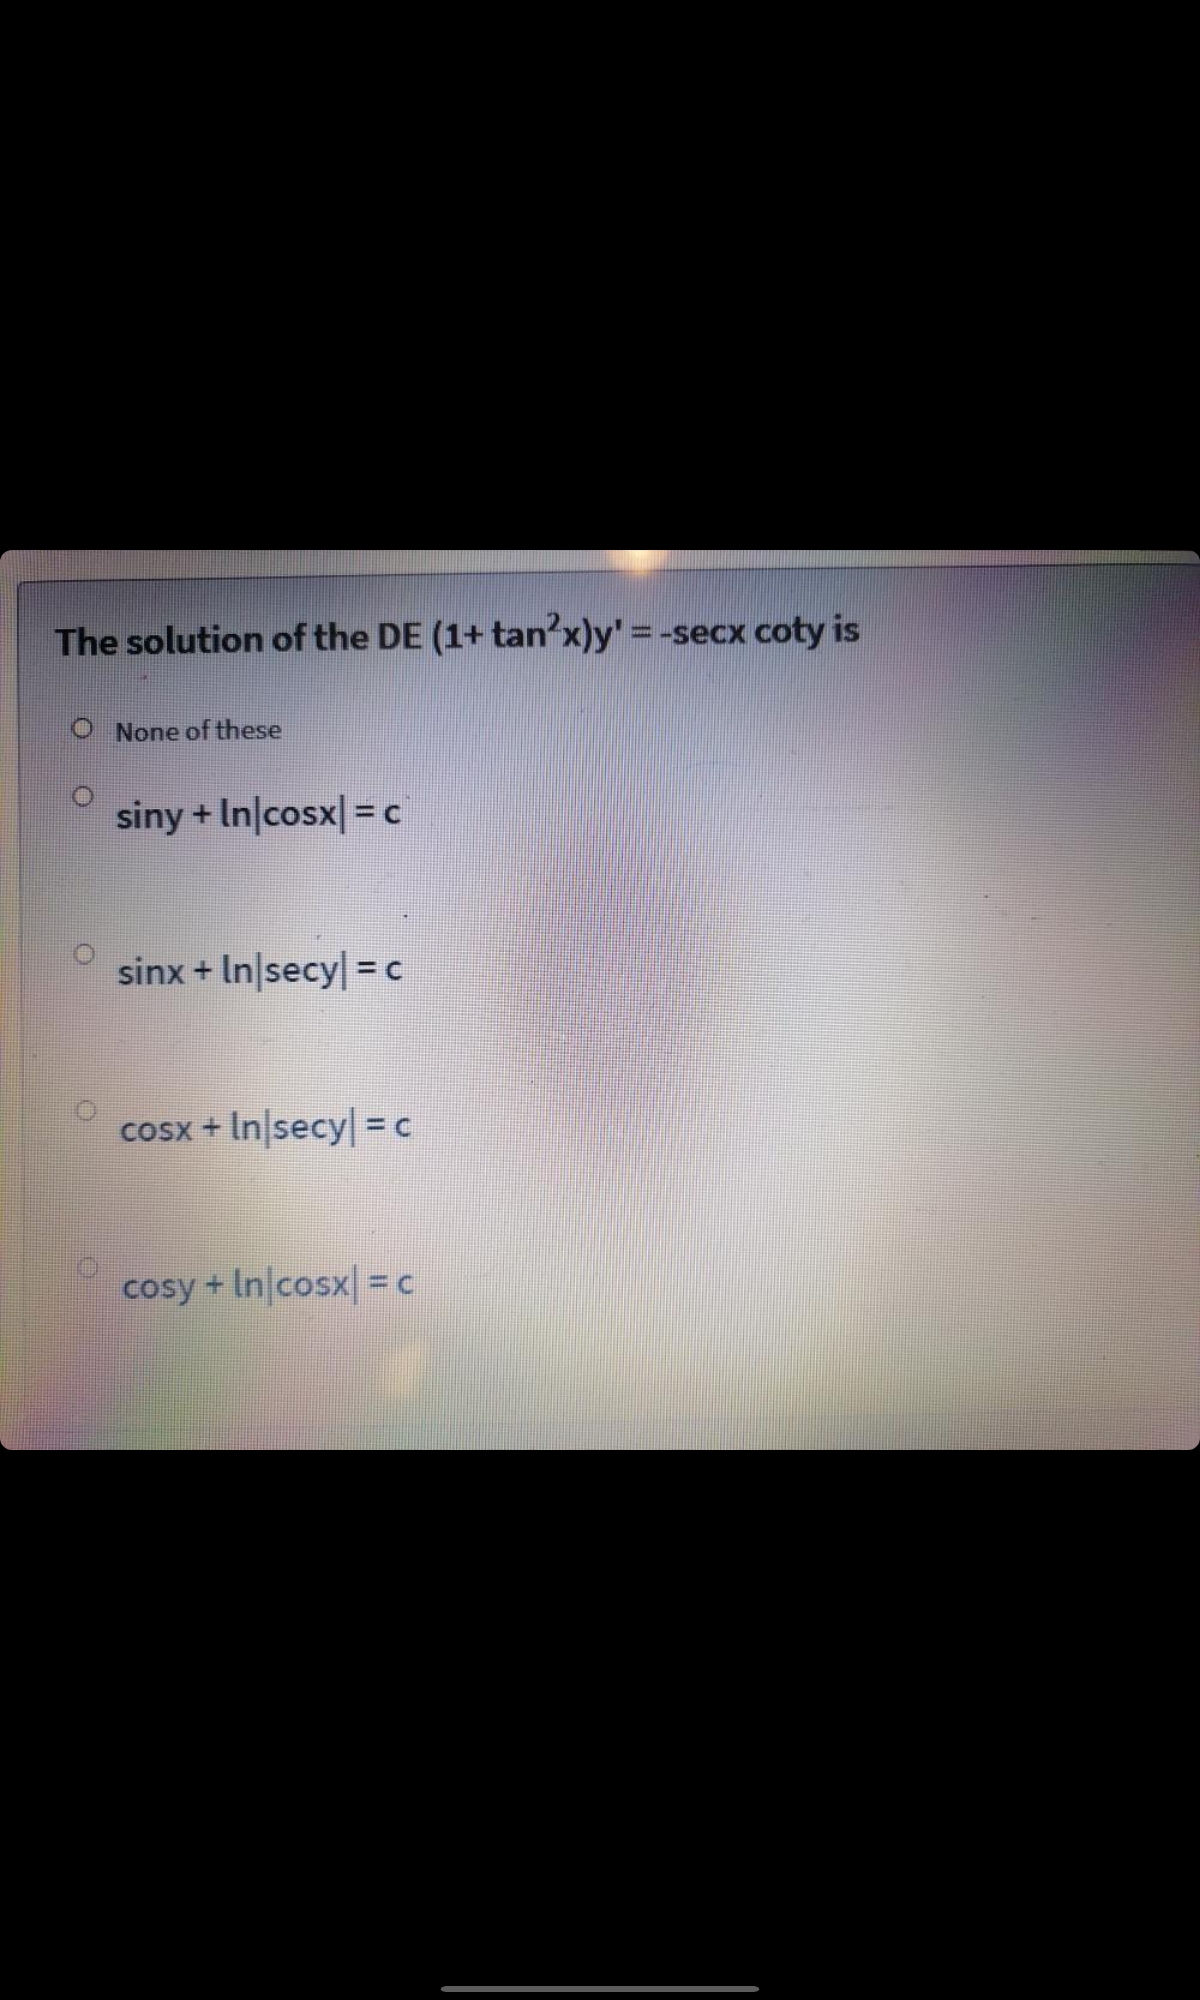 The solution of the DE (1+ tan x)y'= -secx coty is
O None of these
siny + In|cosx| = c
sinx + In|secy = c
cosx + In|secy = c
%3D
cosy + In cosx = c
3DC
